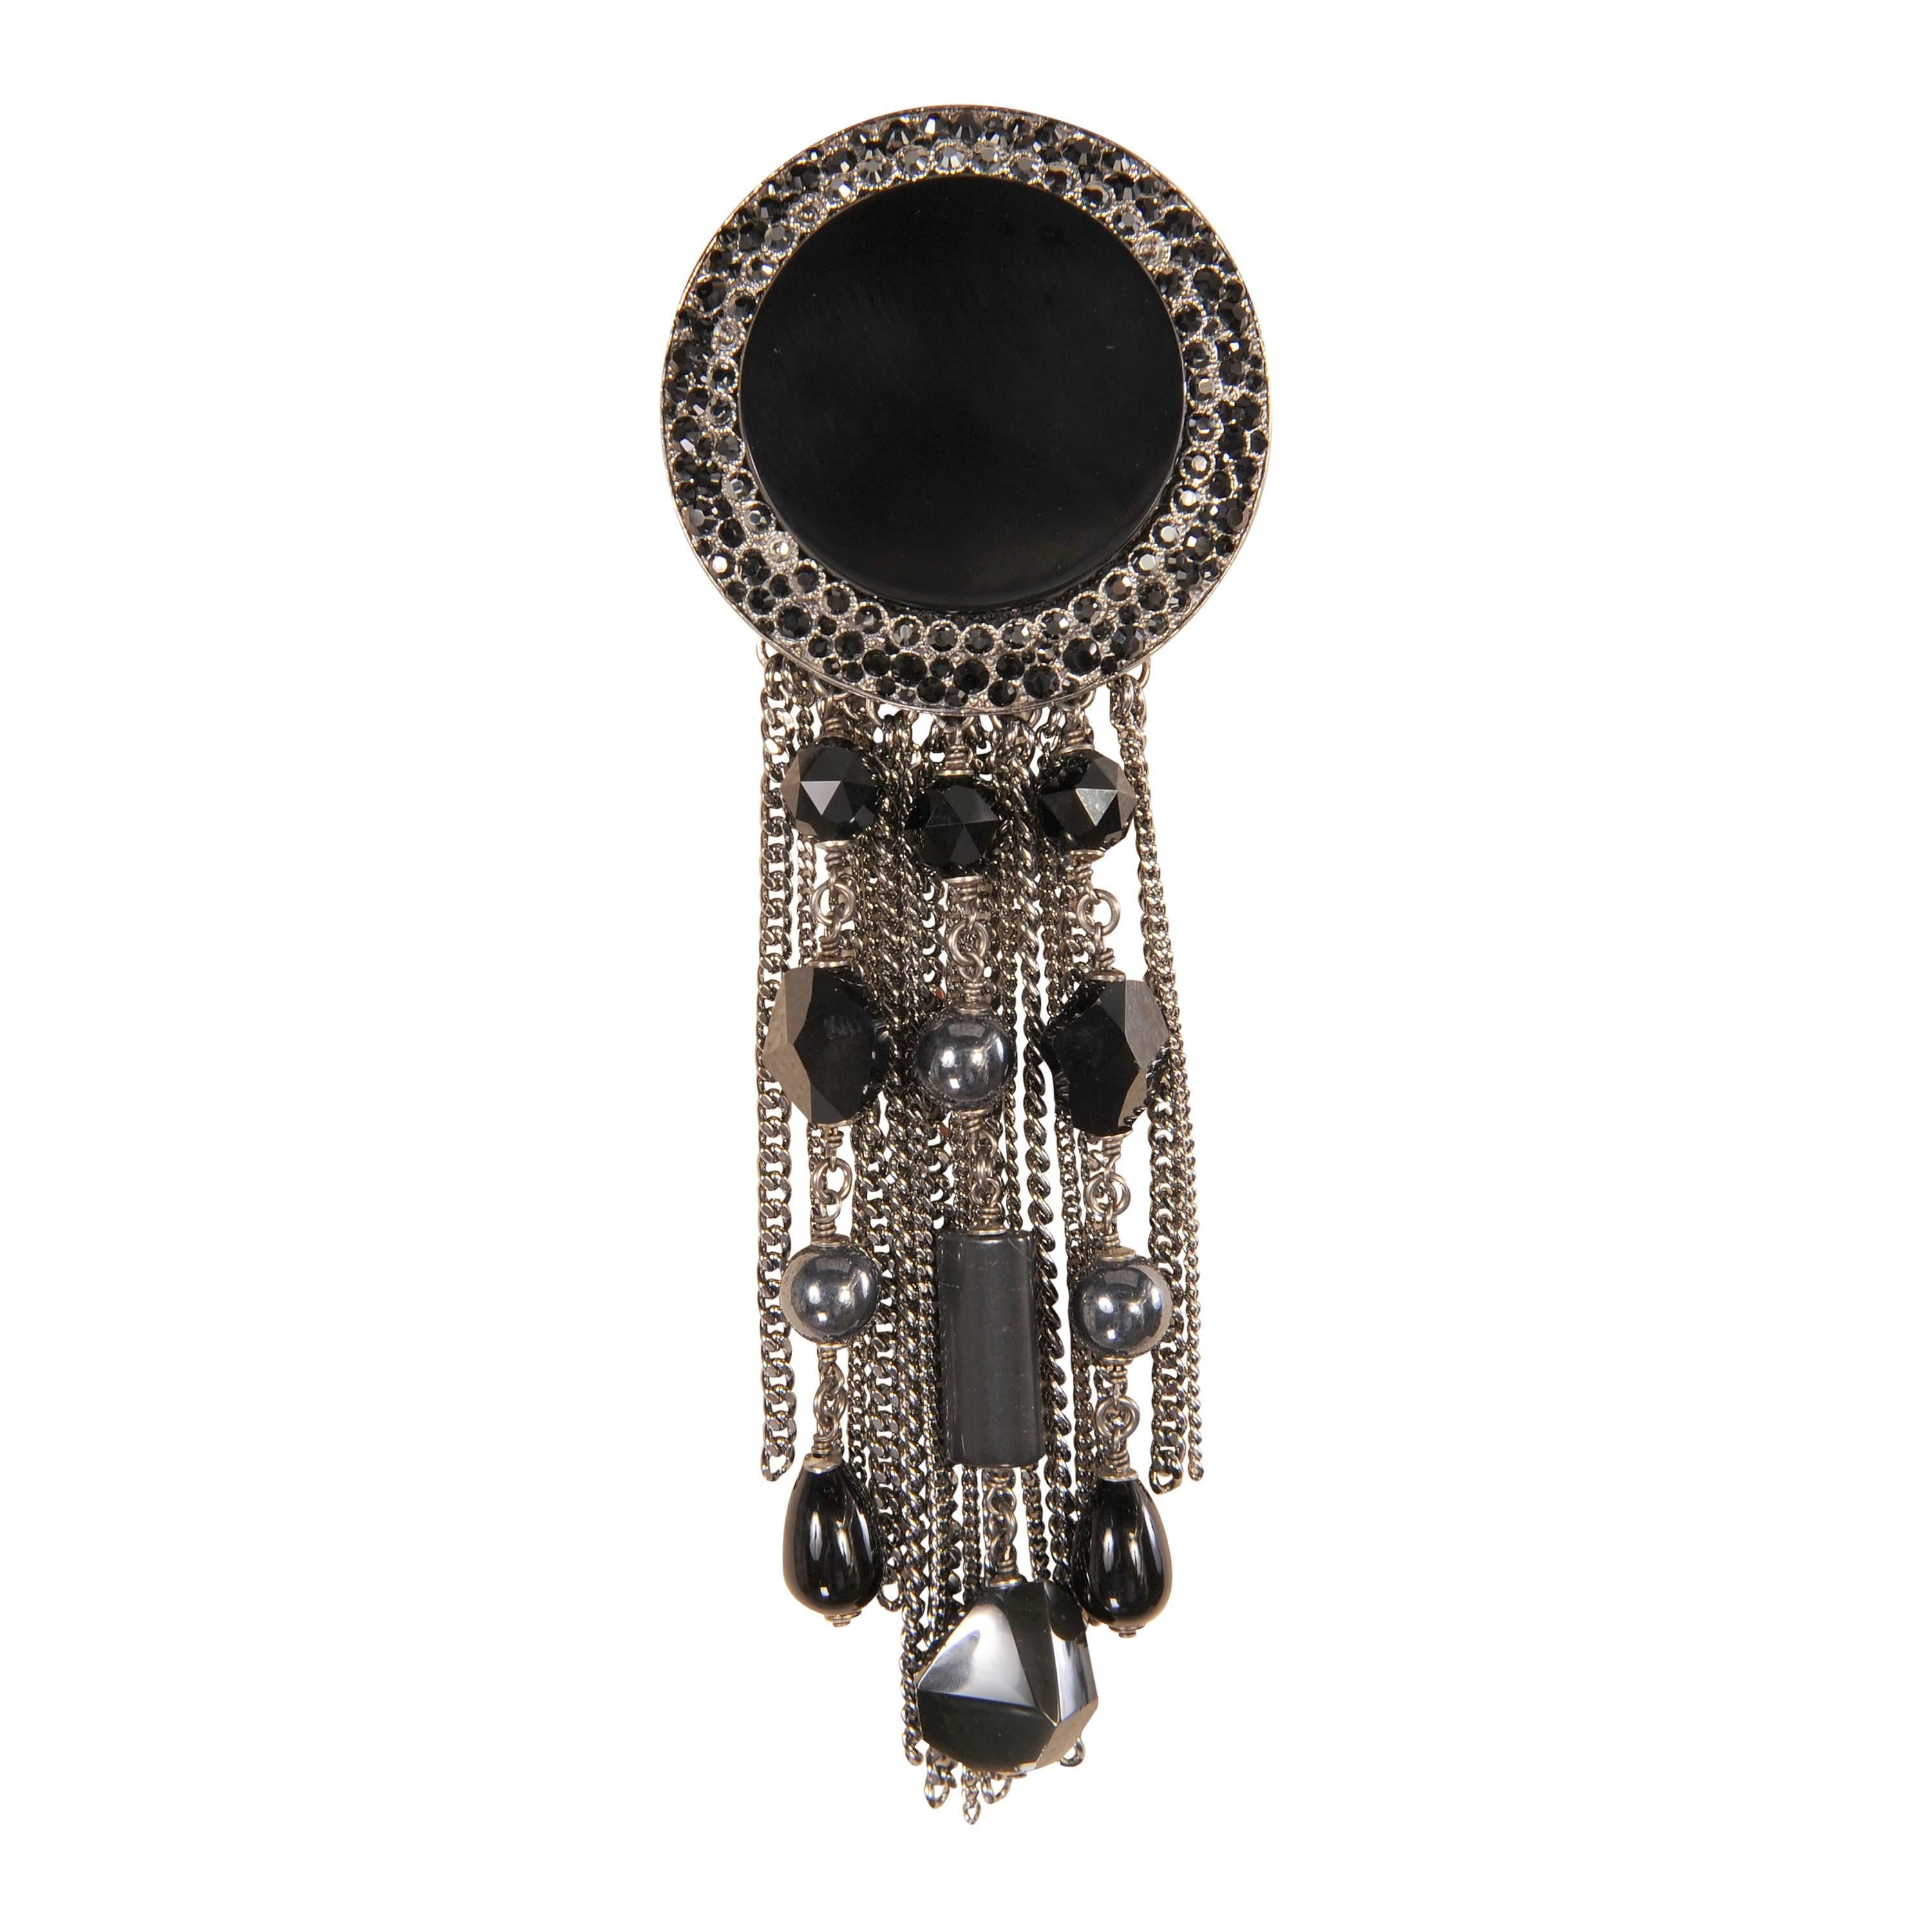 Chanel Signed Gripoix Pin with Chains & Glass Beads